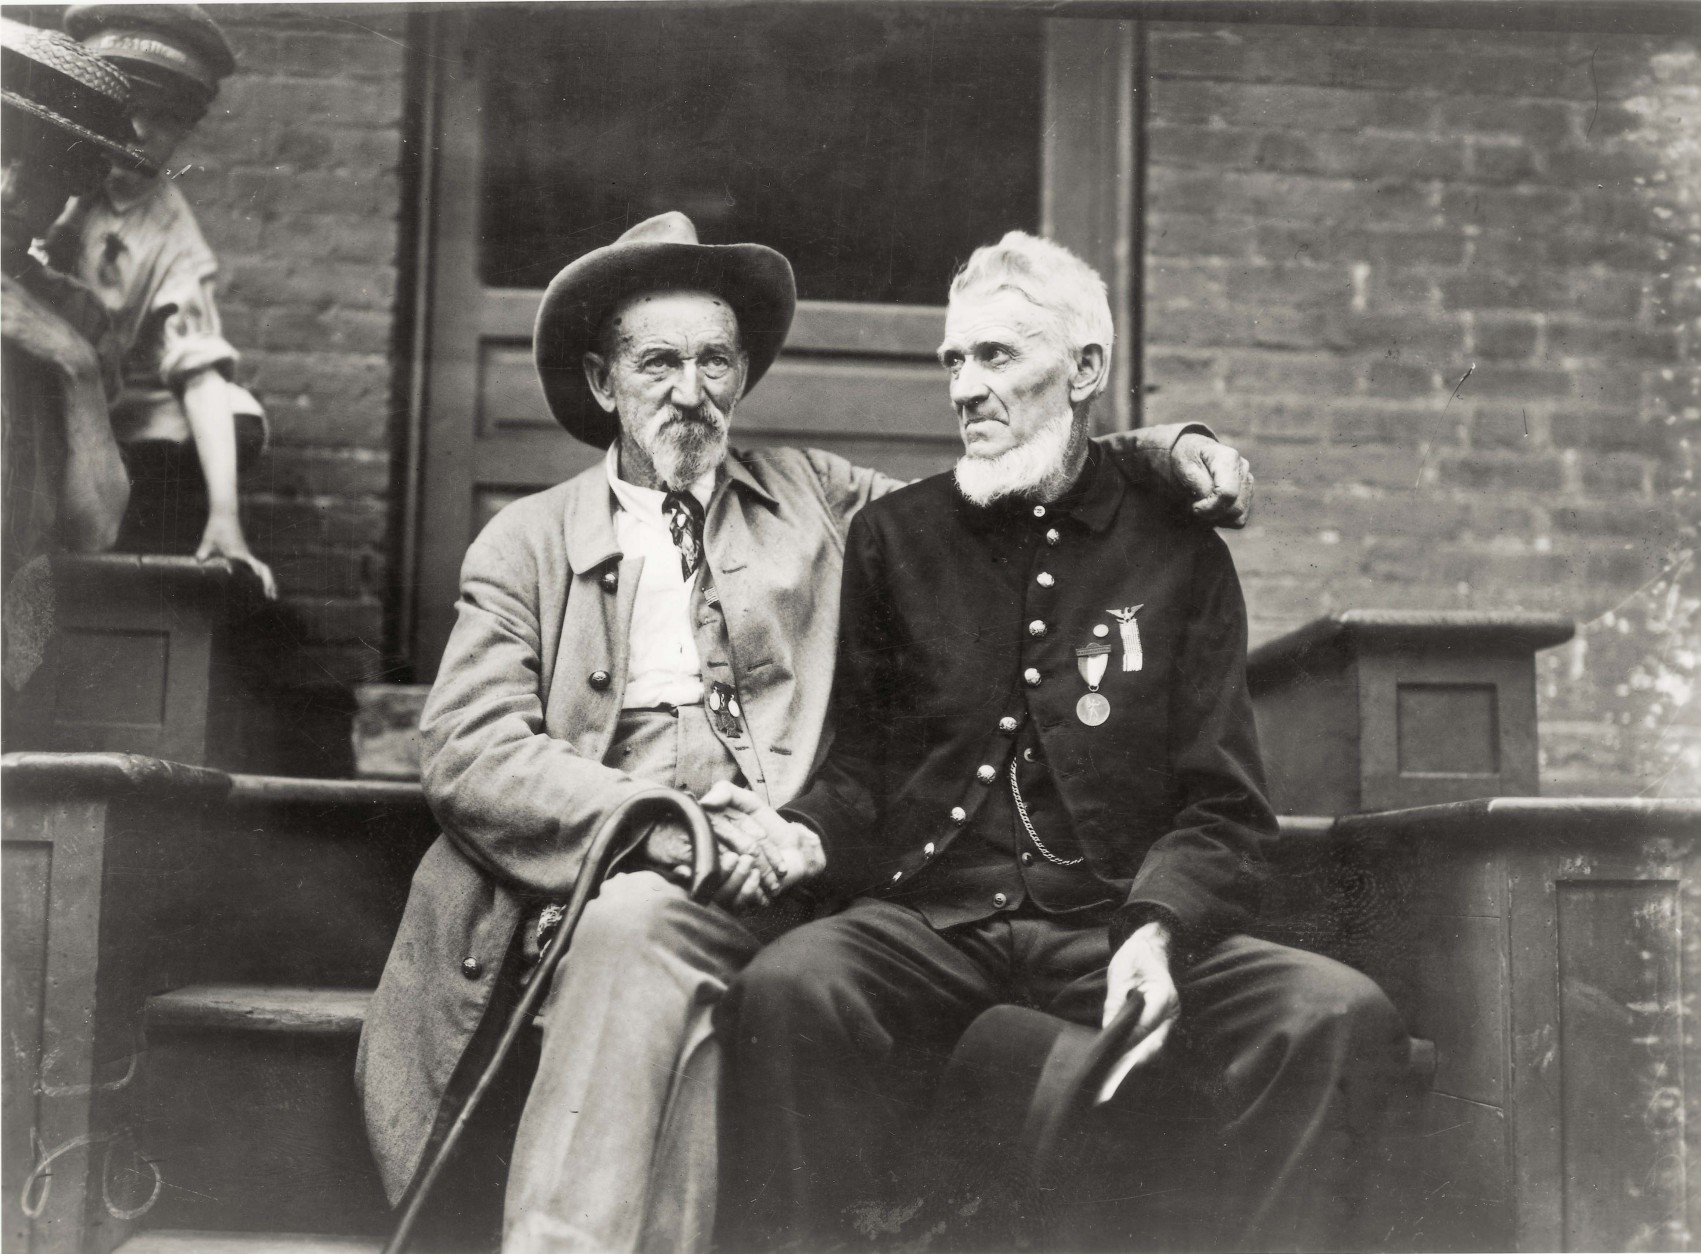 ** ADVANCE FOR SUNDAY MAY 21 AND THEREAFTER ** This photograph from the Library of Congress provided by Abrams Books shows an unidentified Confederate and Union soldier in a photo titled "The Blue and the Grey at Gettysburg, Assembly Tent" on the 50th anniversary reunion at Gettysburg, Penn., in 1913. The image is one of nearly 500 photographs, lithographs, paintings, drawings and cartoons from the Library of Congress's collection published in a new volume, "The American Civil War - 365 Days".  (AP Photo/Library of Congress)